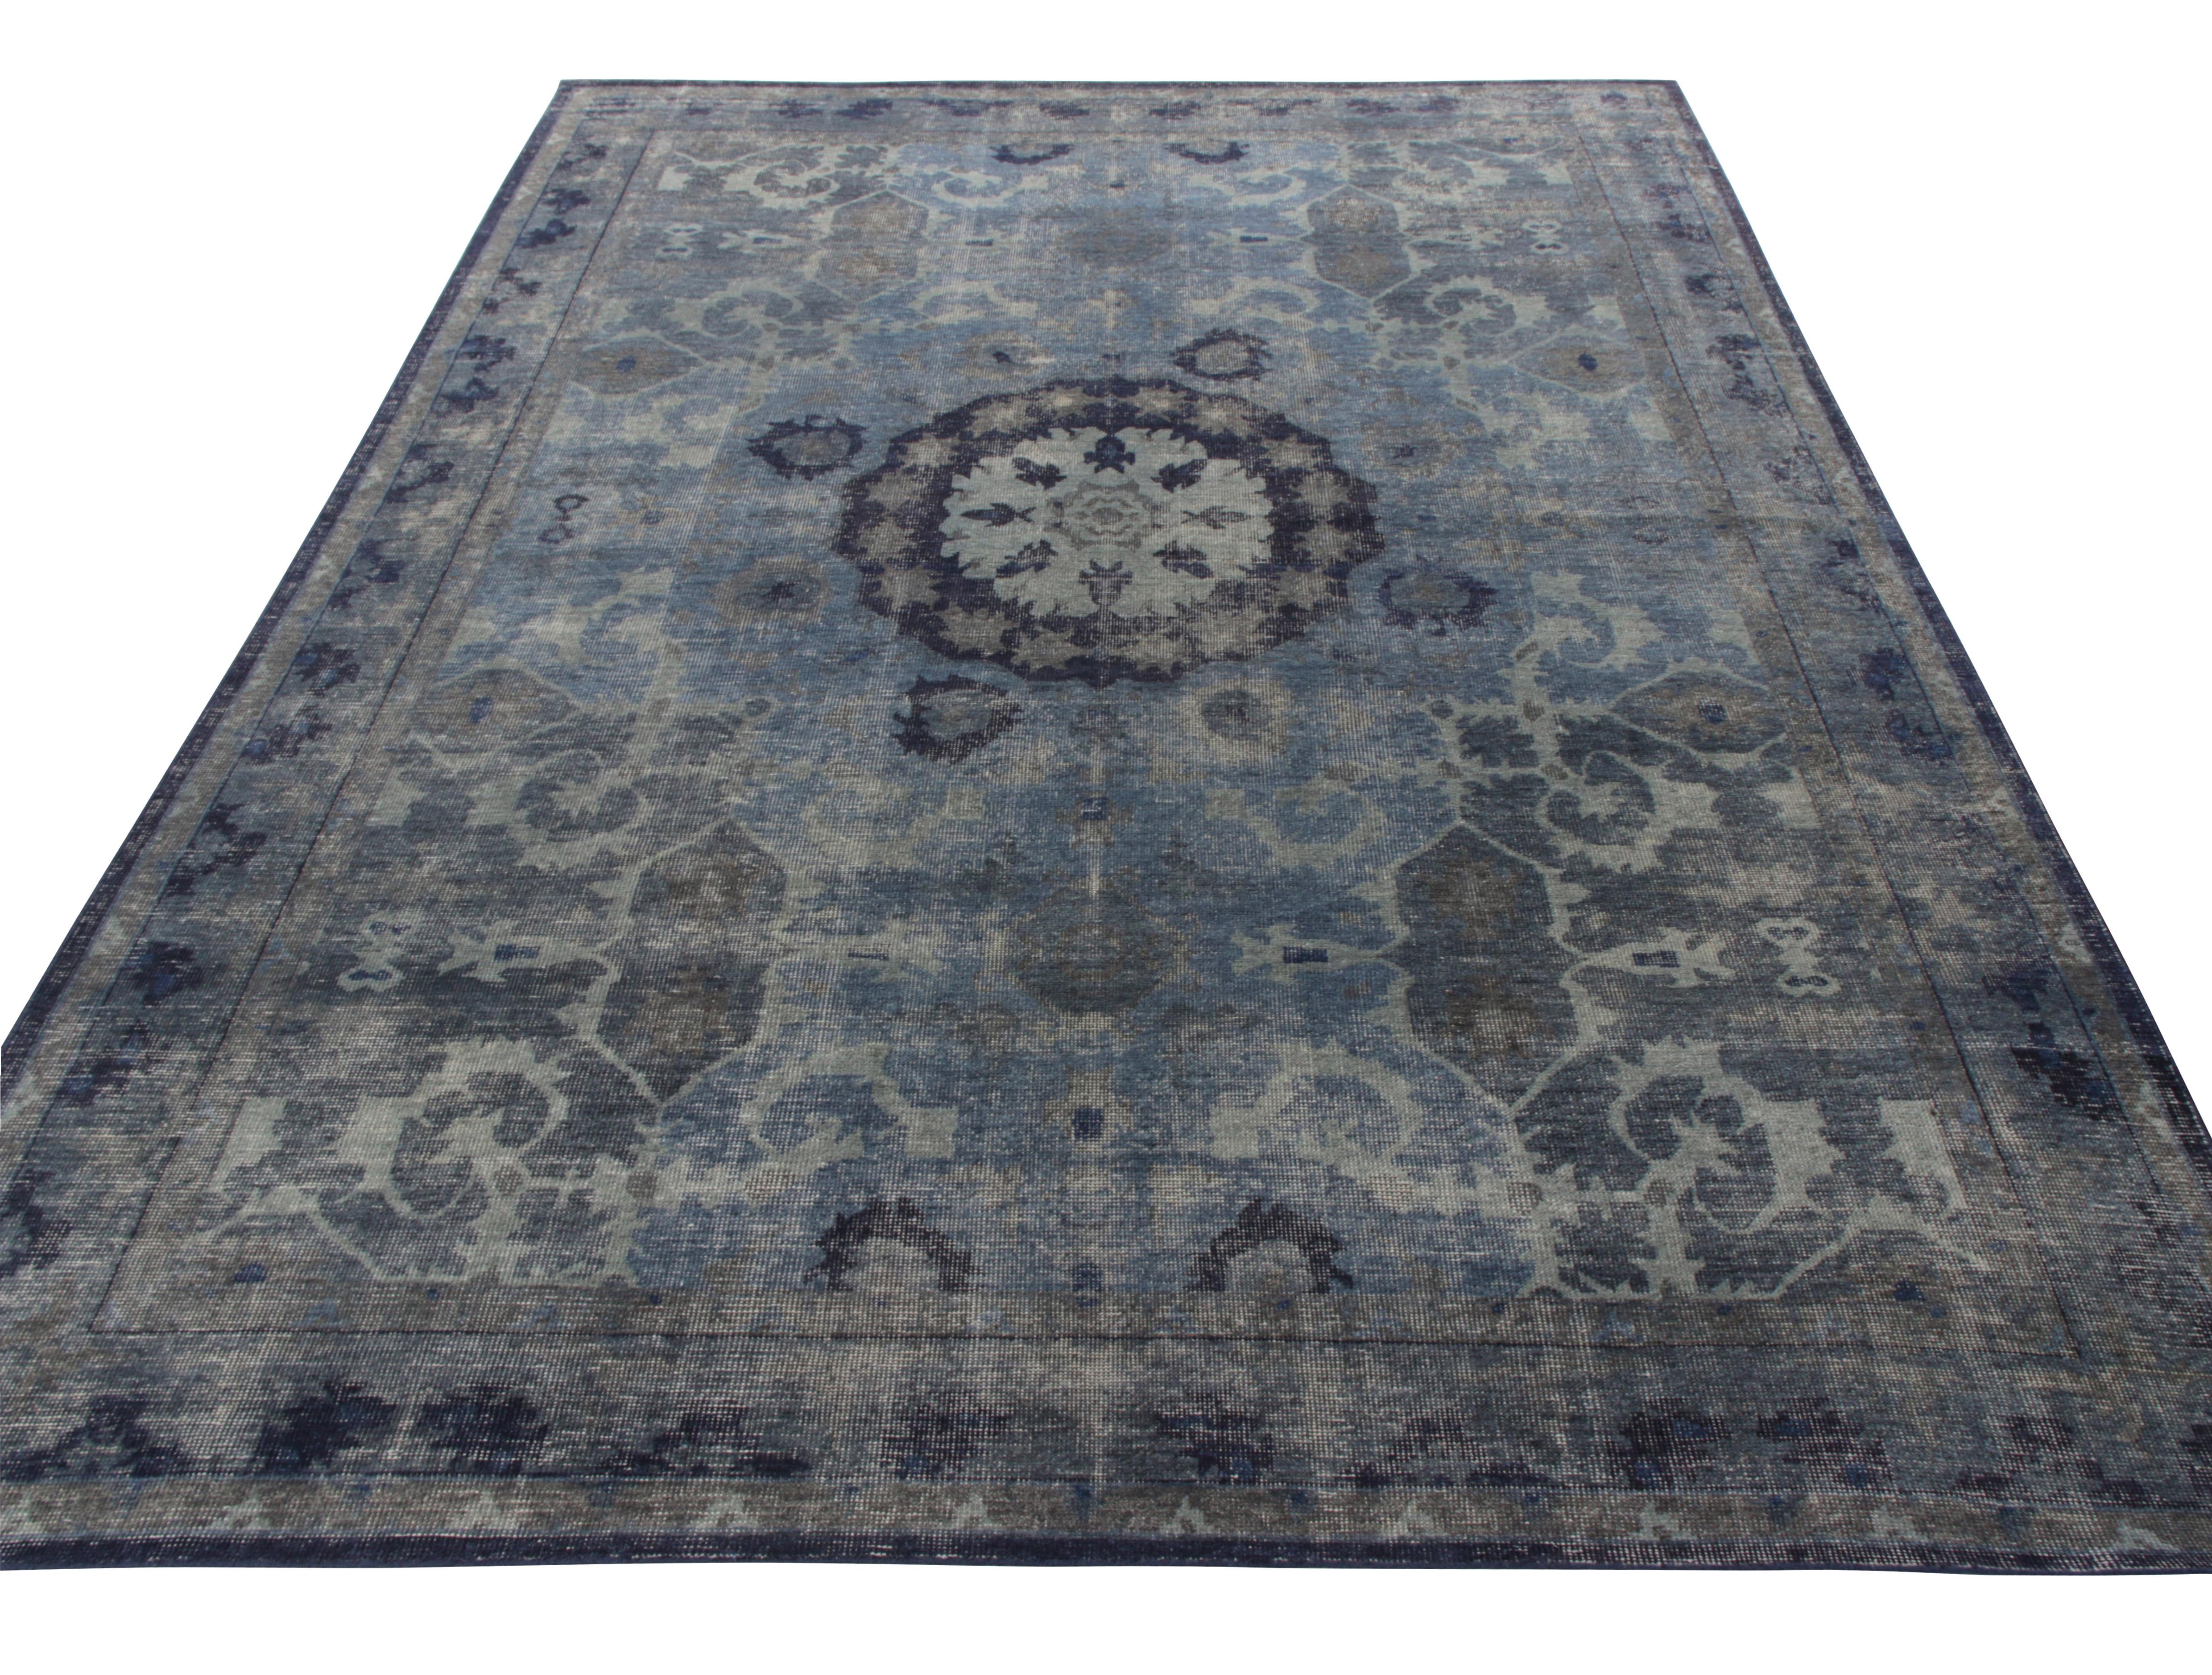 A gorgeous 10x14 hand-knotted rug in distressed style from Rug & Kilim’s Homage Collection. Inspired from classic oriental style, the rug features a striking medallion pattern surrounded by a subtle floral design in gorgeous colors of blue and gray